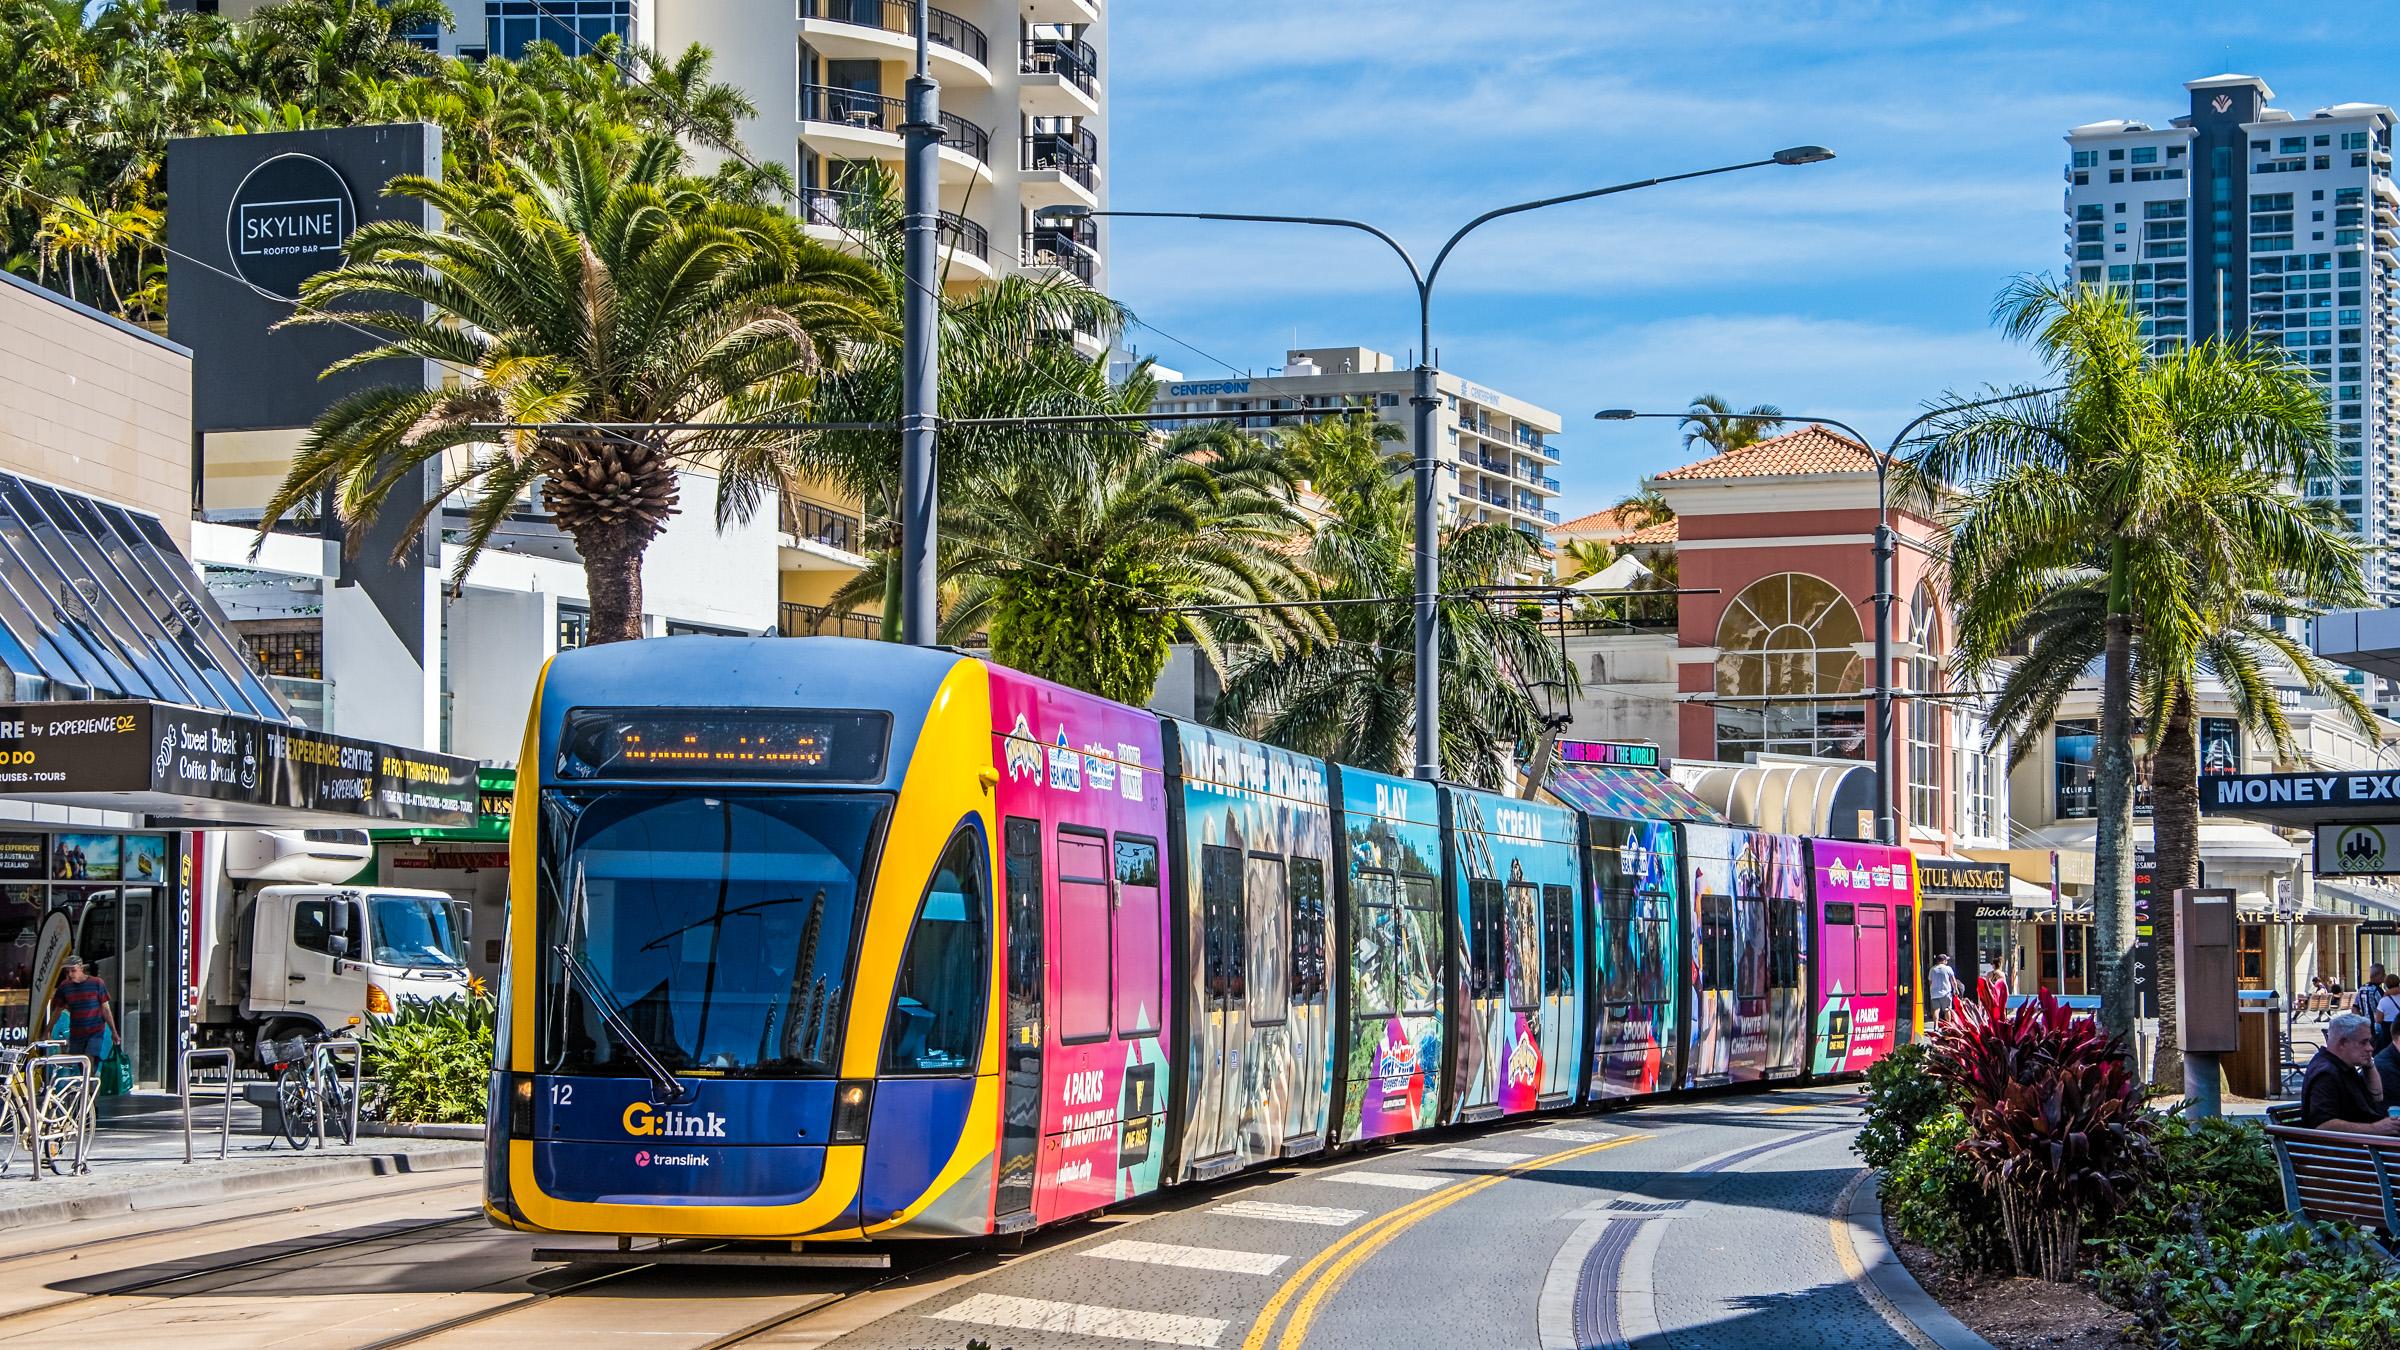 Gold Coast tram rail passing through the centre of Surfers Paradise past restaurants, retail stores and hotels